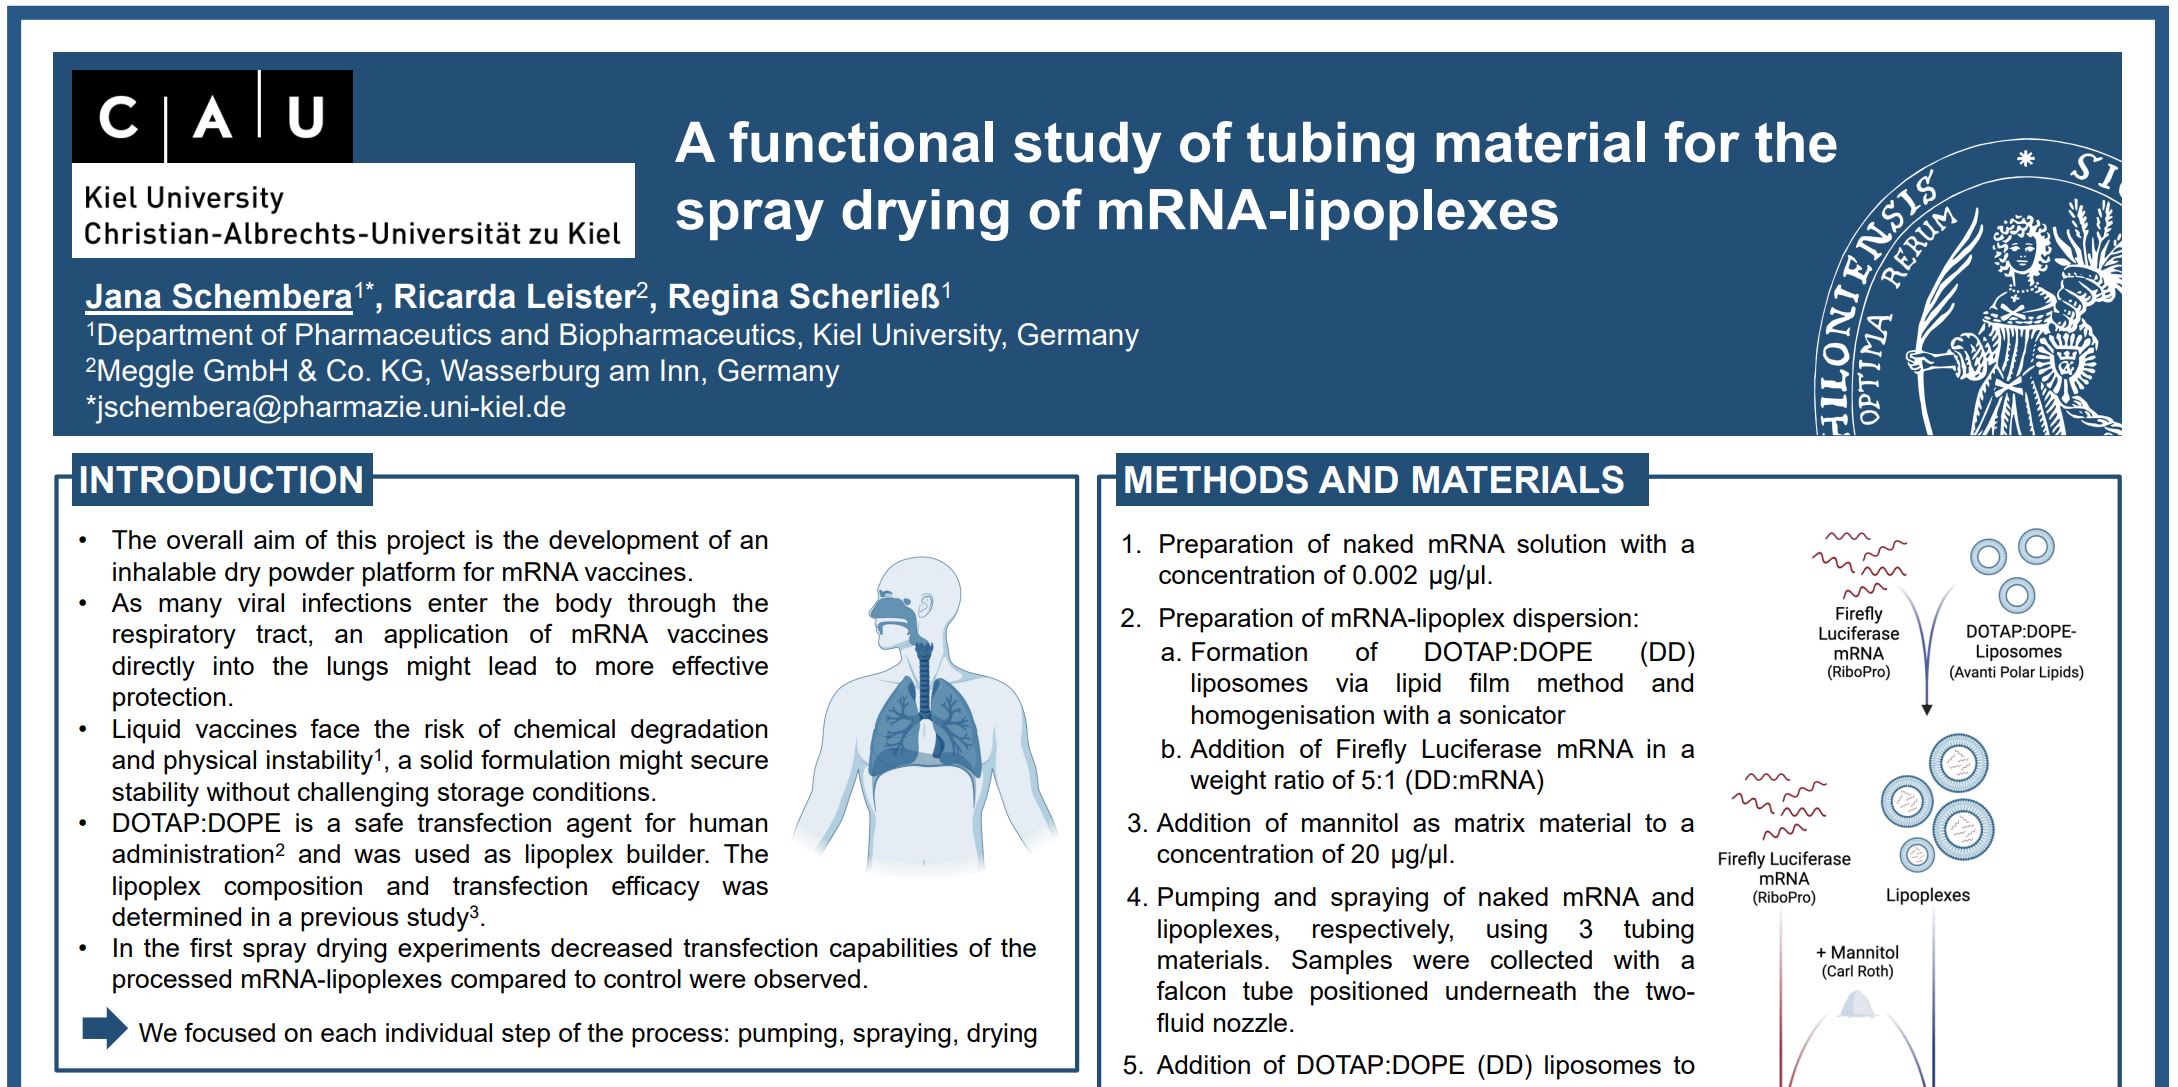 A functional study of tubing material for the spray drying of mRNA-lipoplexes_title